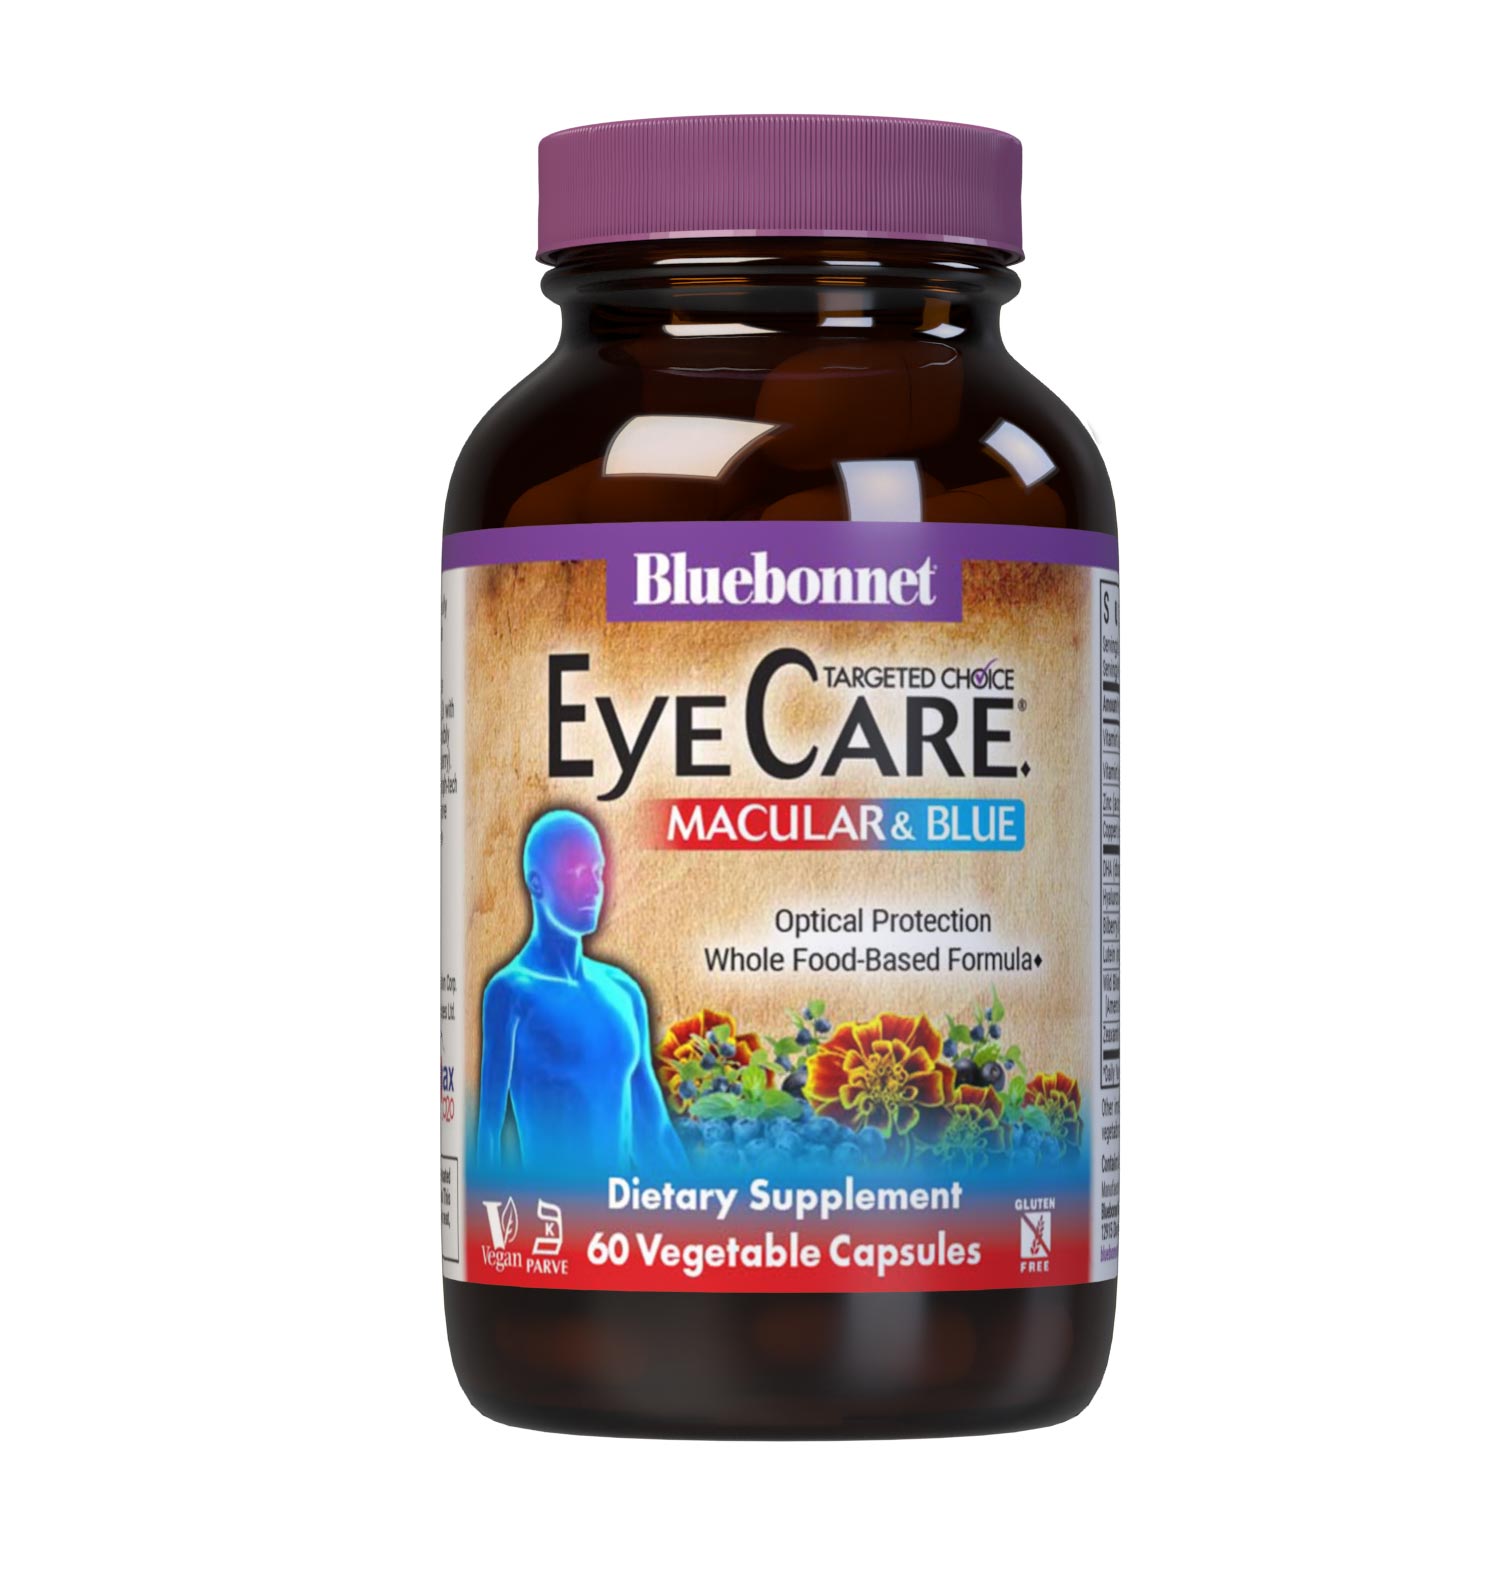 Bluebonnet’s Targeted Choice EyeCare 60 Vegetable Capsules are specially formulated to help protect eyes from blue light (e.g., LED) with the clinically studied nutrients, as well as hyaluronic acid and sustainably harvested or wildcrafted super fruits. Shielding the eyes from photo stress caused by blue light from high tech devices like computer, smartphone and tablet screens may improve visual performance and support healthy eyes for years to come.  #size_60 count